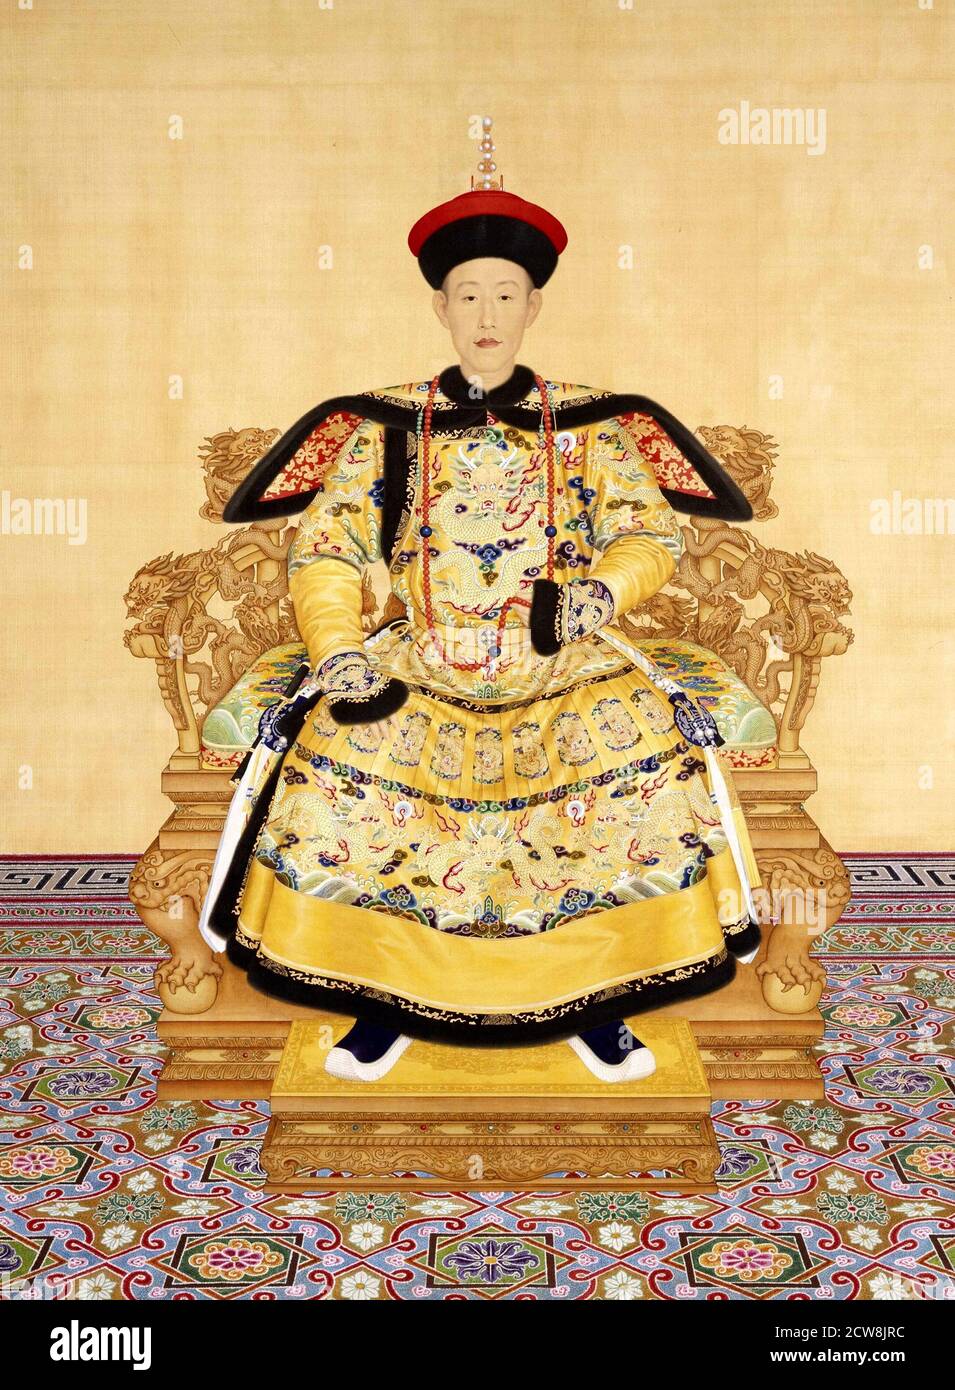 The Qianlong Emperor in court dress by Giuseppe Castiglione (1688-1766, Chinese name Lang Shining), 1736. The Qianlong Emperor (1711-1799) was the 6th Emperor of the Qing Dynasty in China Stock Photo